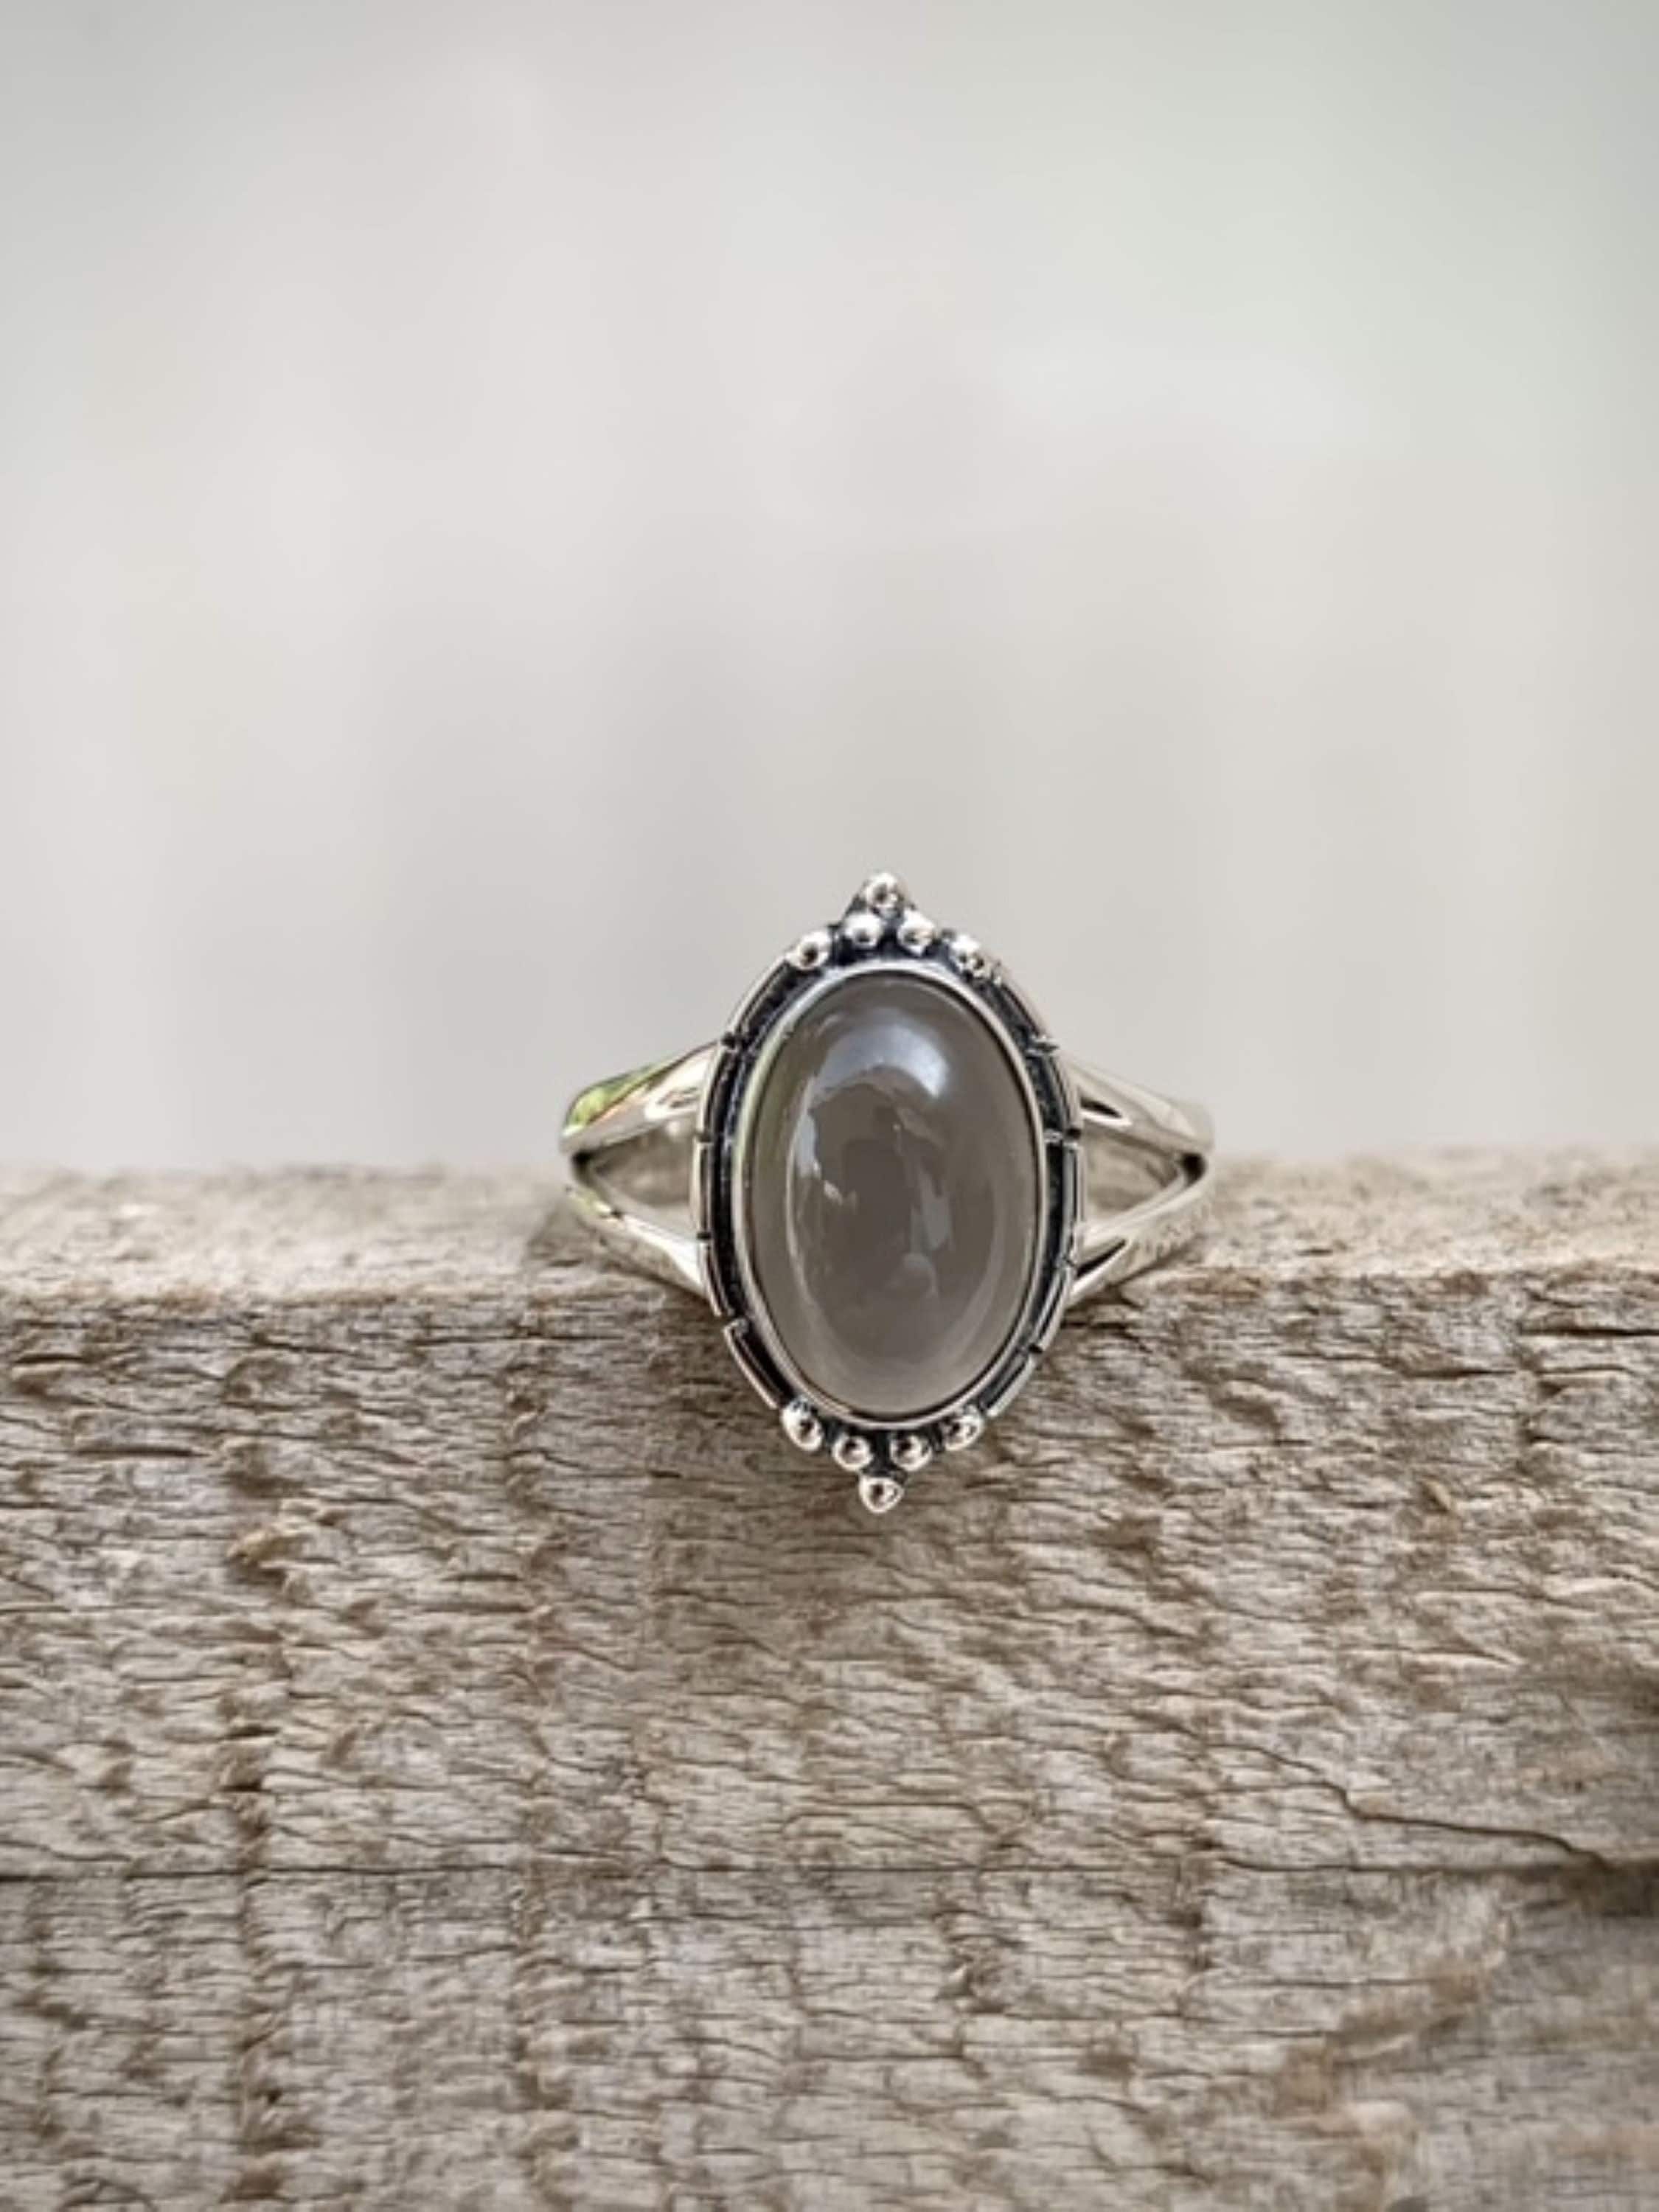 Buy Black Moonstone Ring Gemstone 925 Sterling Silver Ring , Moonstone Ring  ,ring Size 9 US Gift for Mother, Gift for Her, Women Ring CAN 597 Online in  India - Etsy